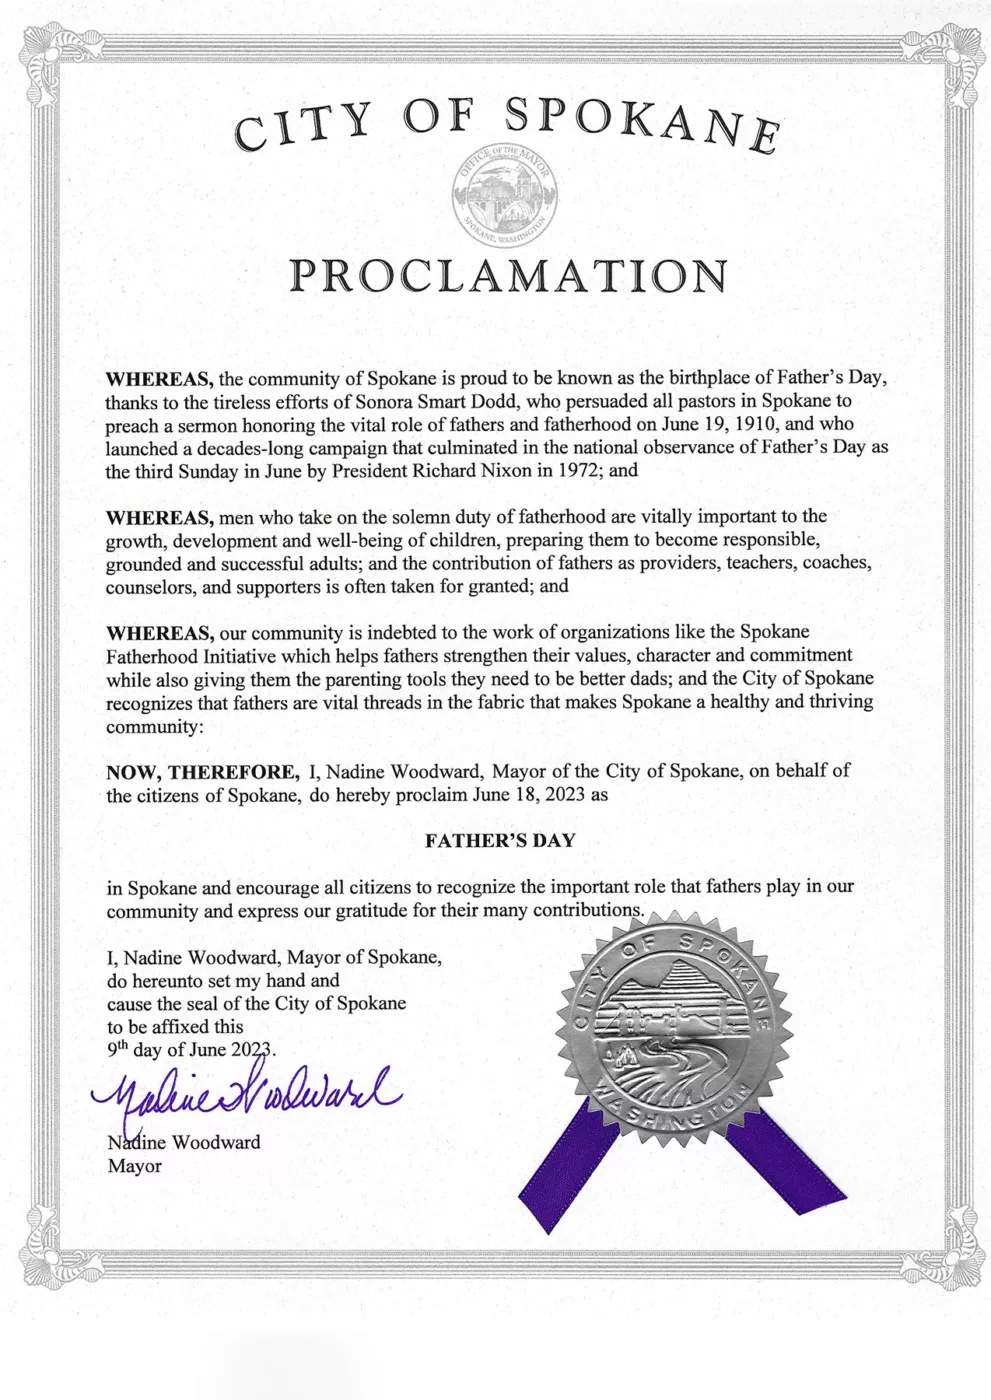 Father's Day City Proclamation